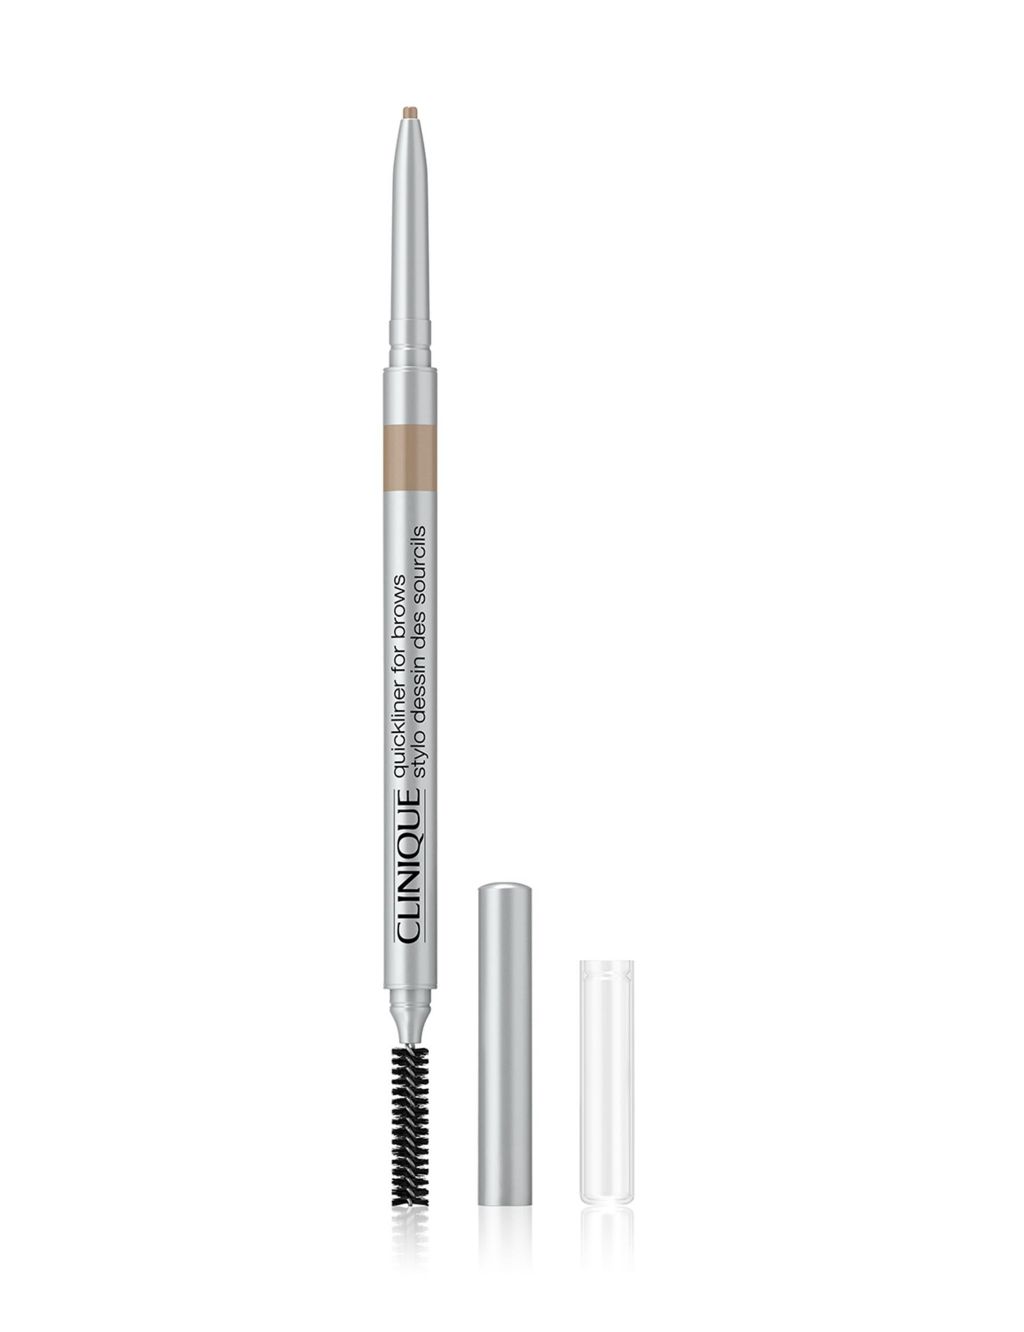 Quickliner™ for Brows 0.6g